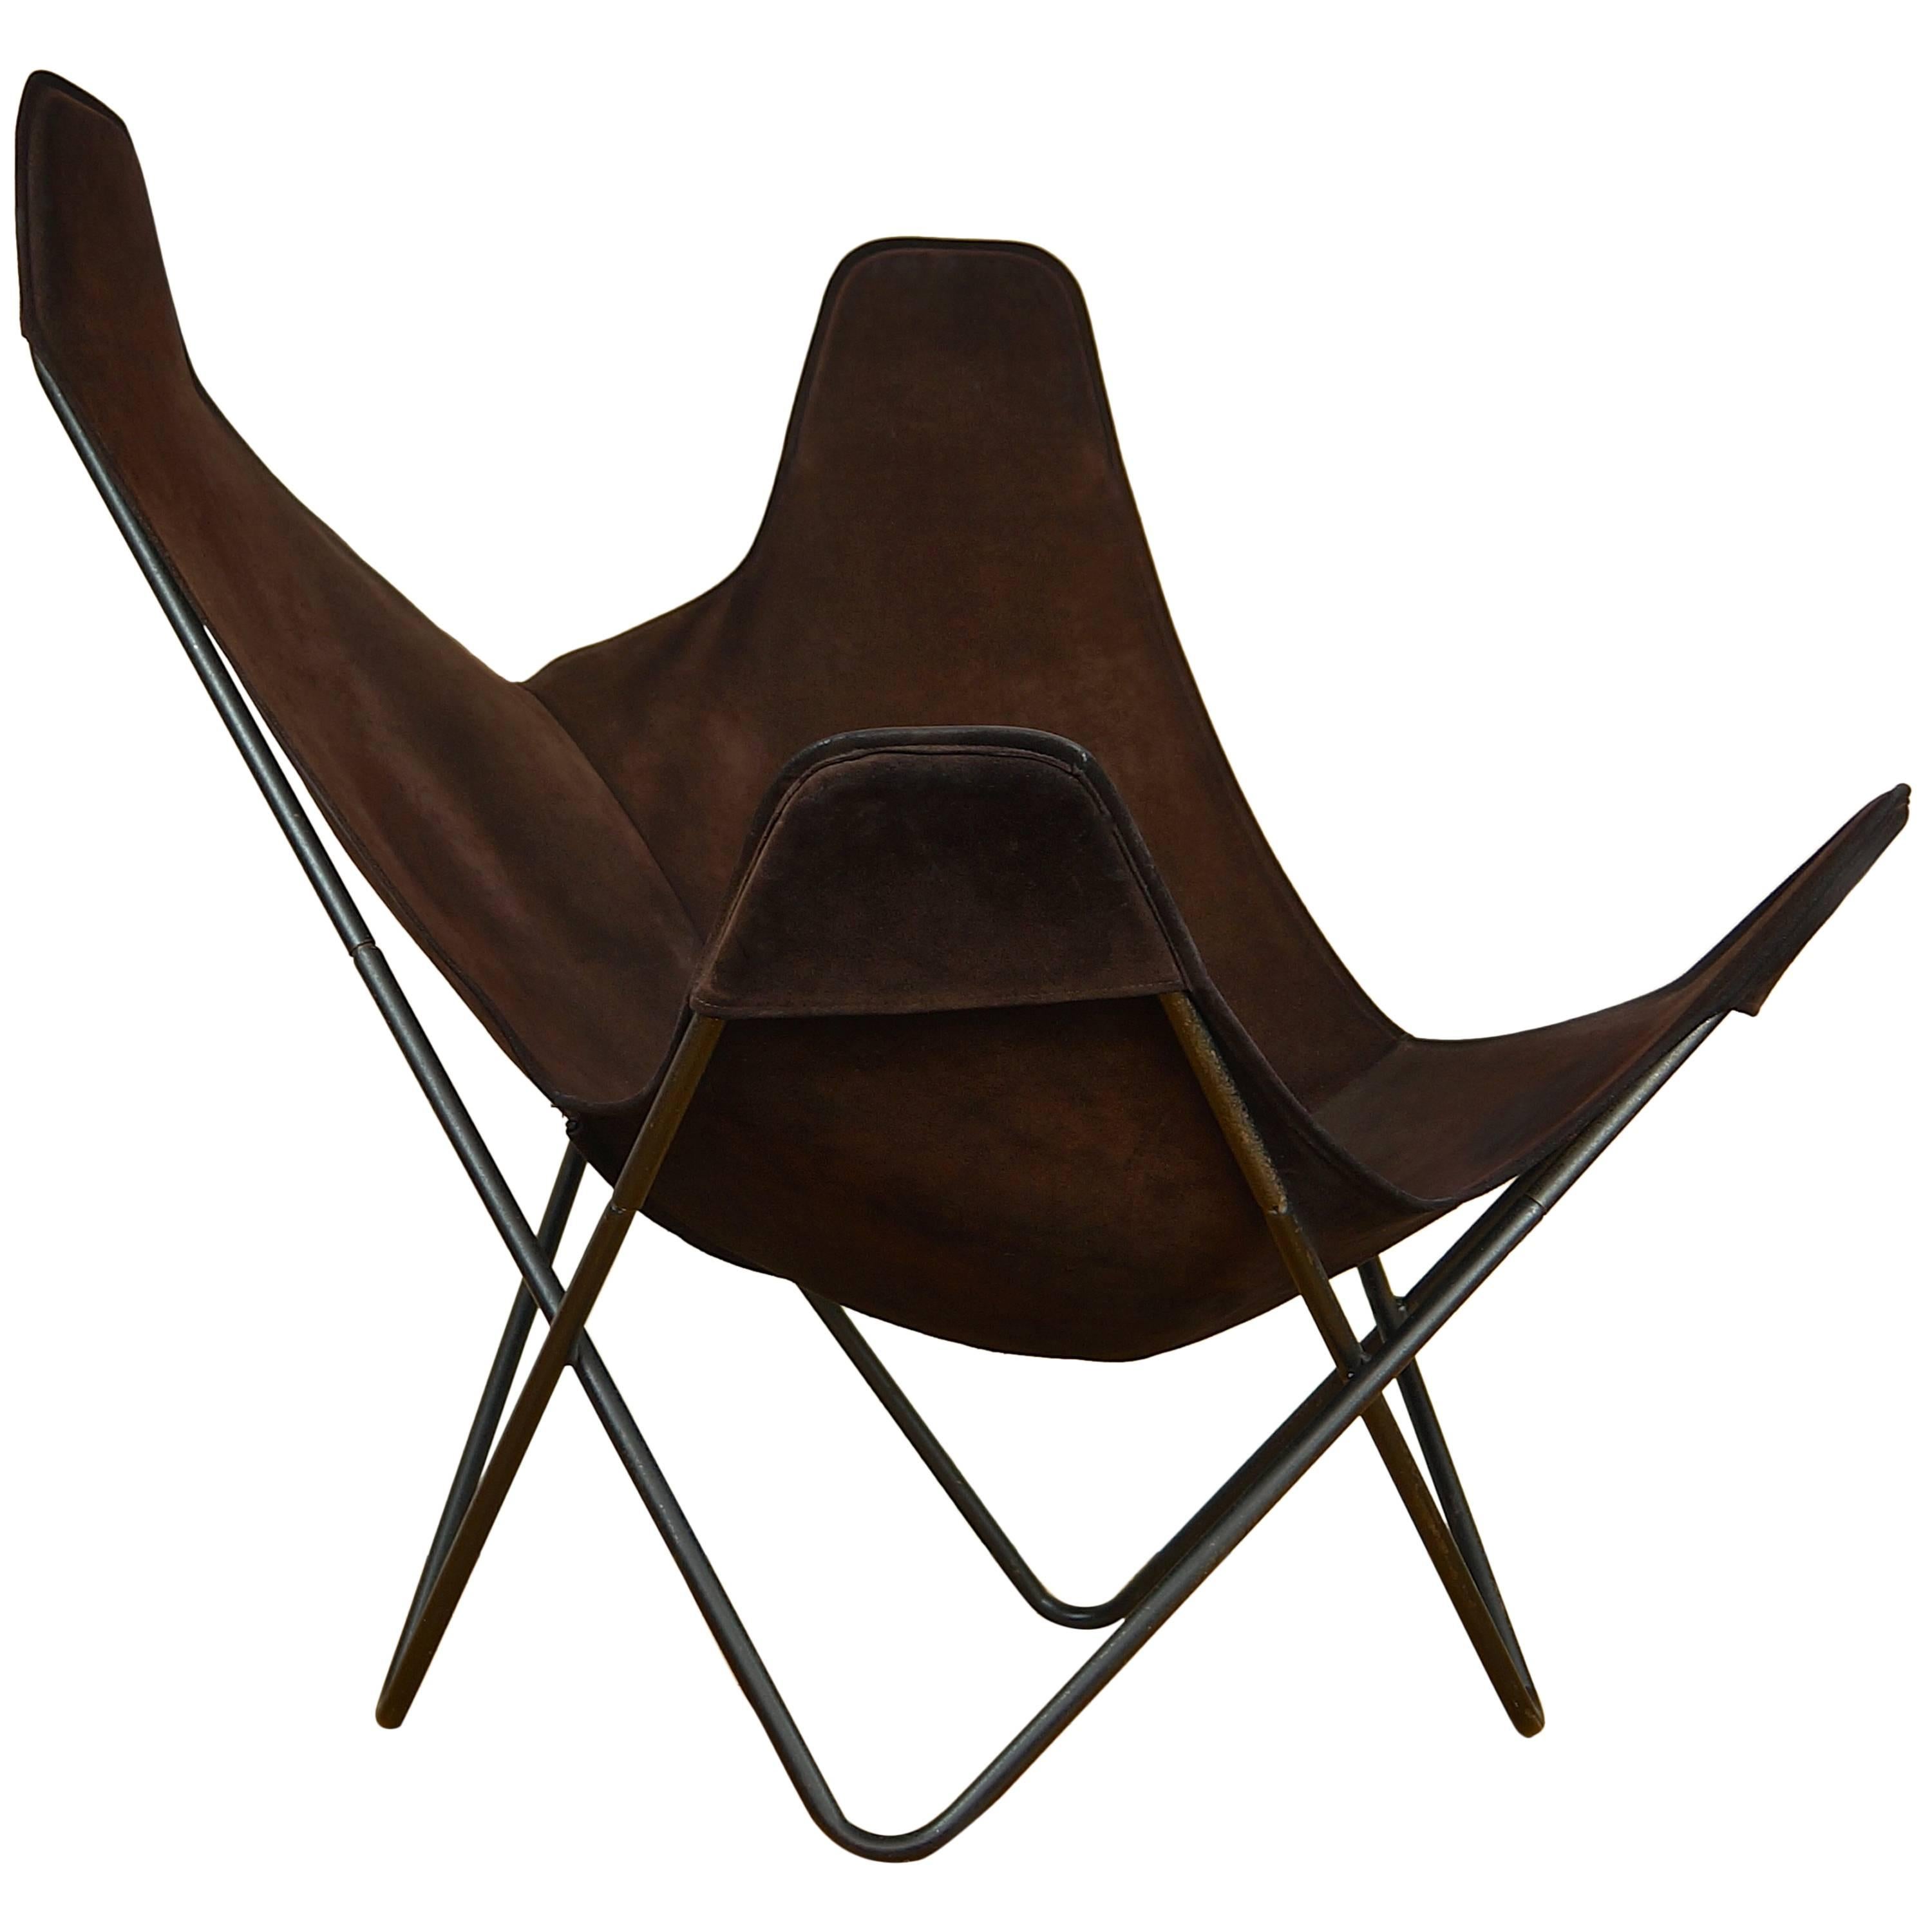 1970s Knoll Butterfly Chair by Jorge Ferrari-Hardoy, Suede Leather Sling Chair